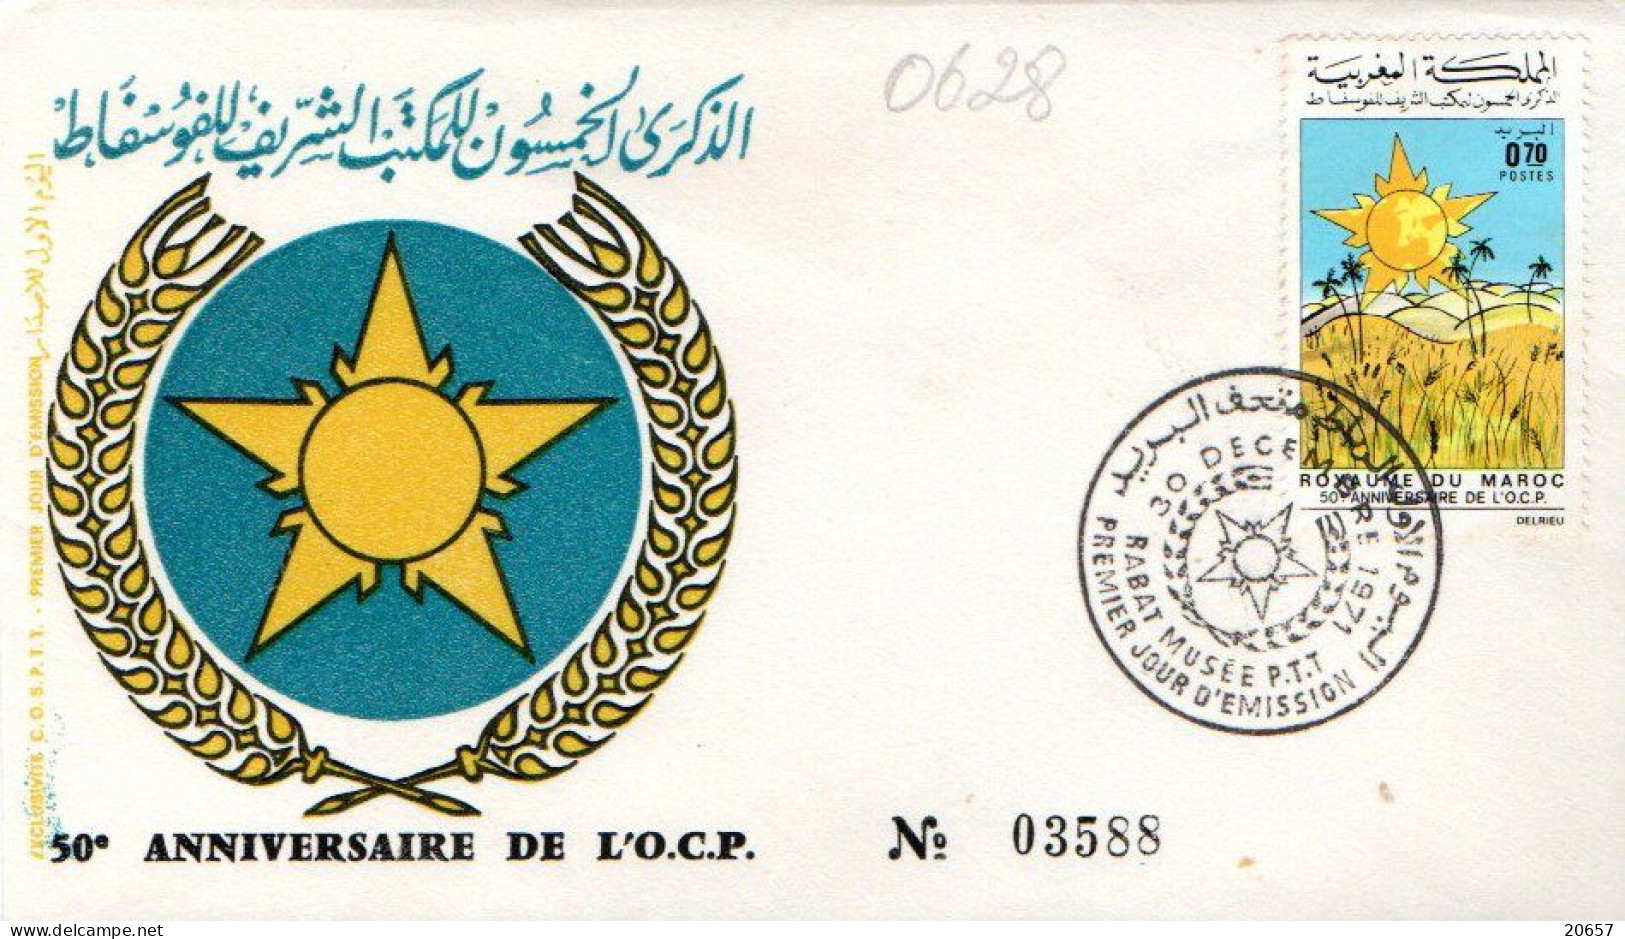 Maroc Al Maghrib 0628 Fdc Phosphates, Agriculture - Minerals